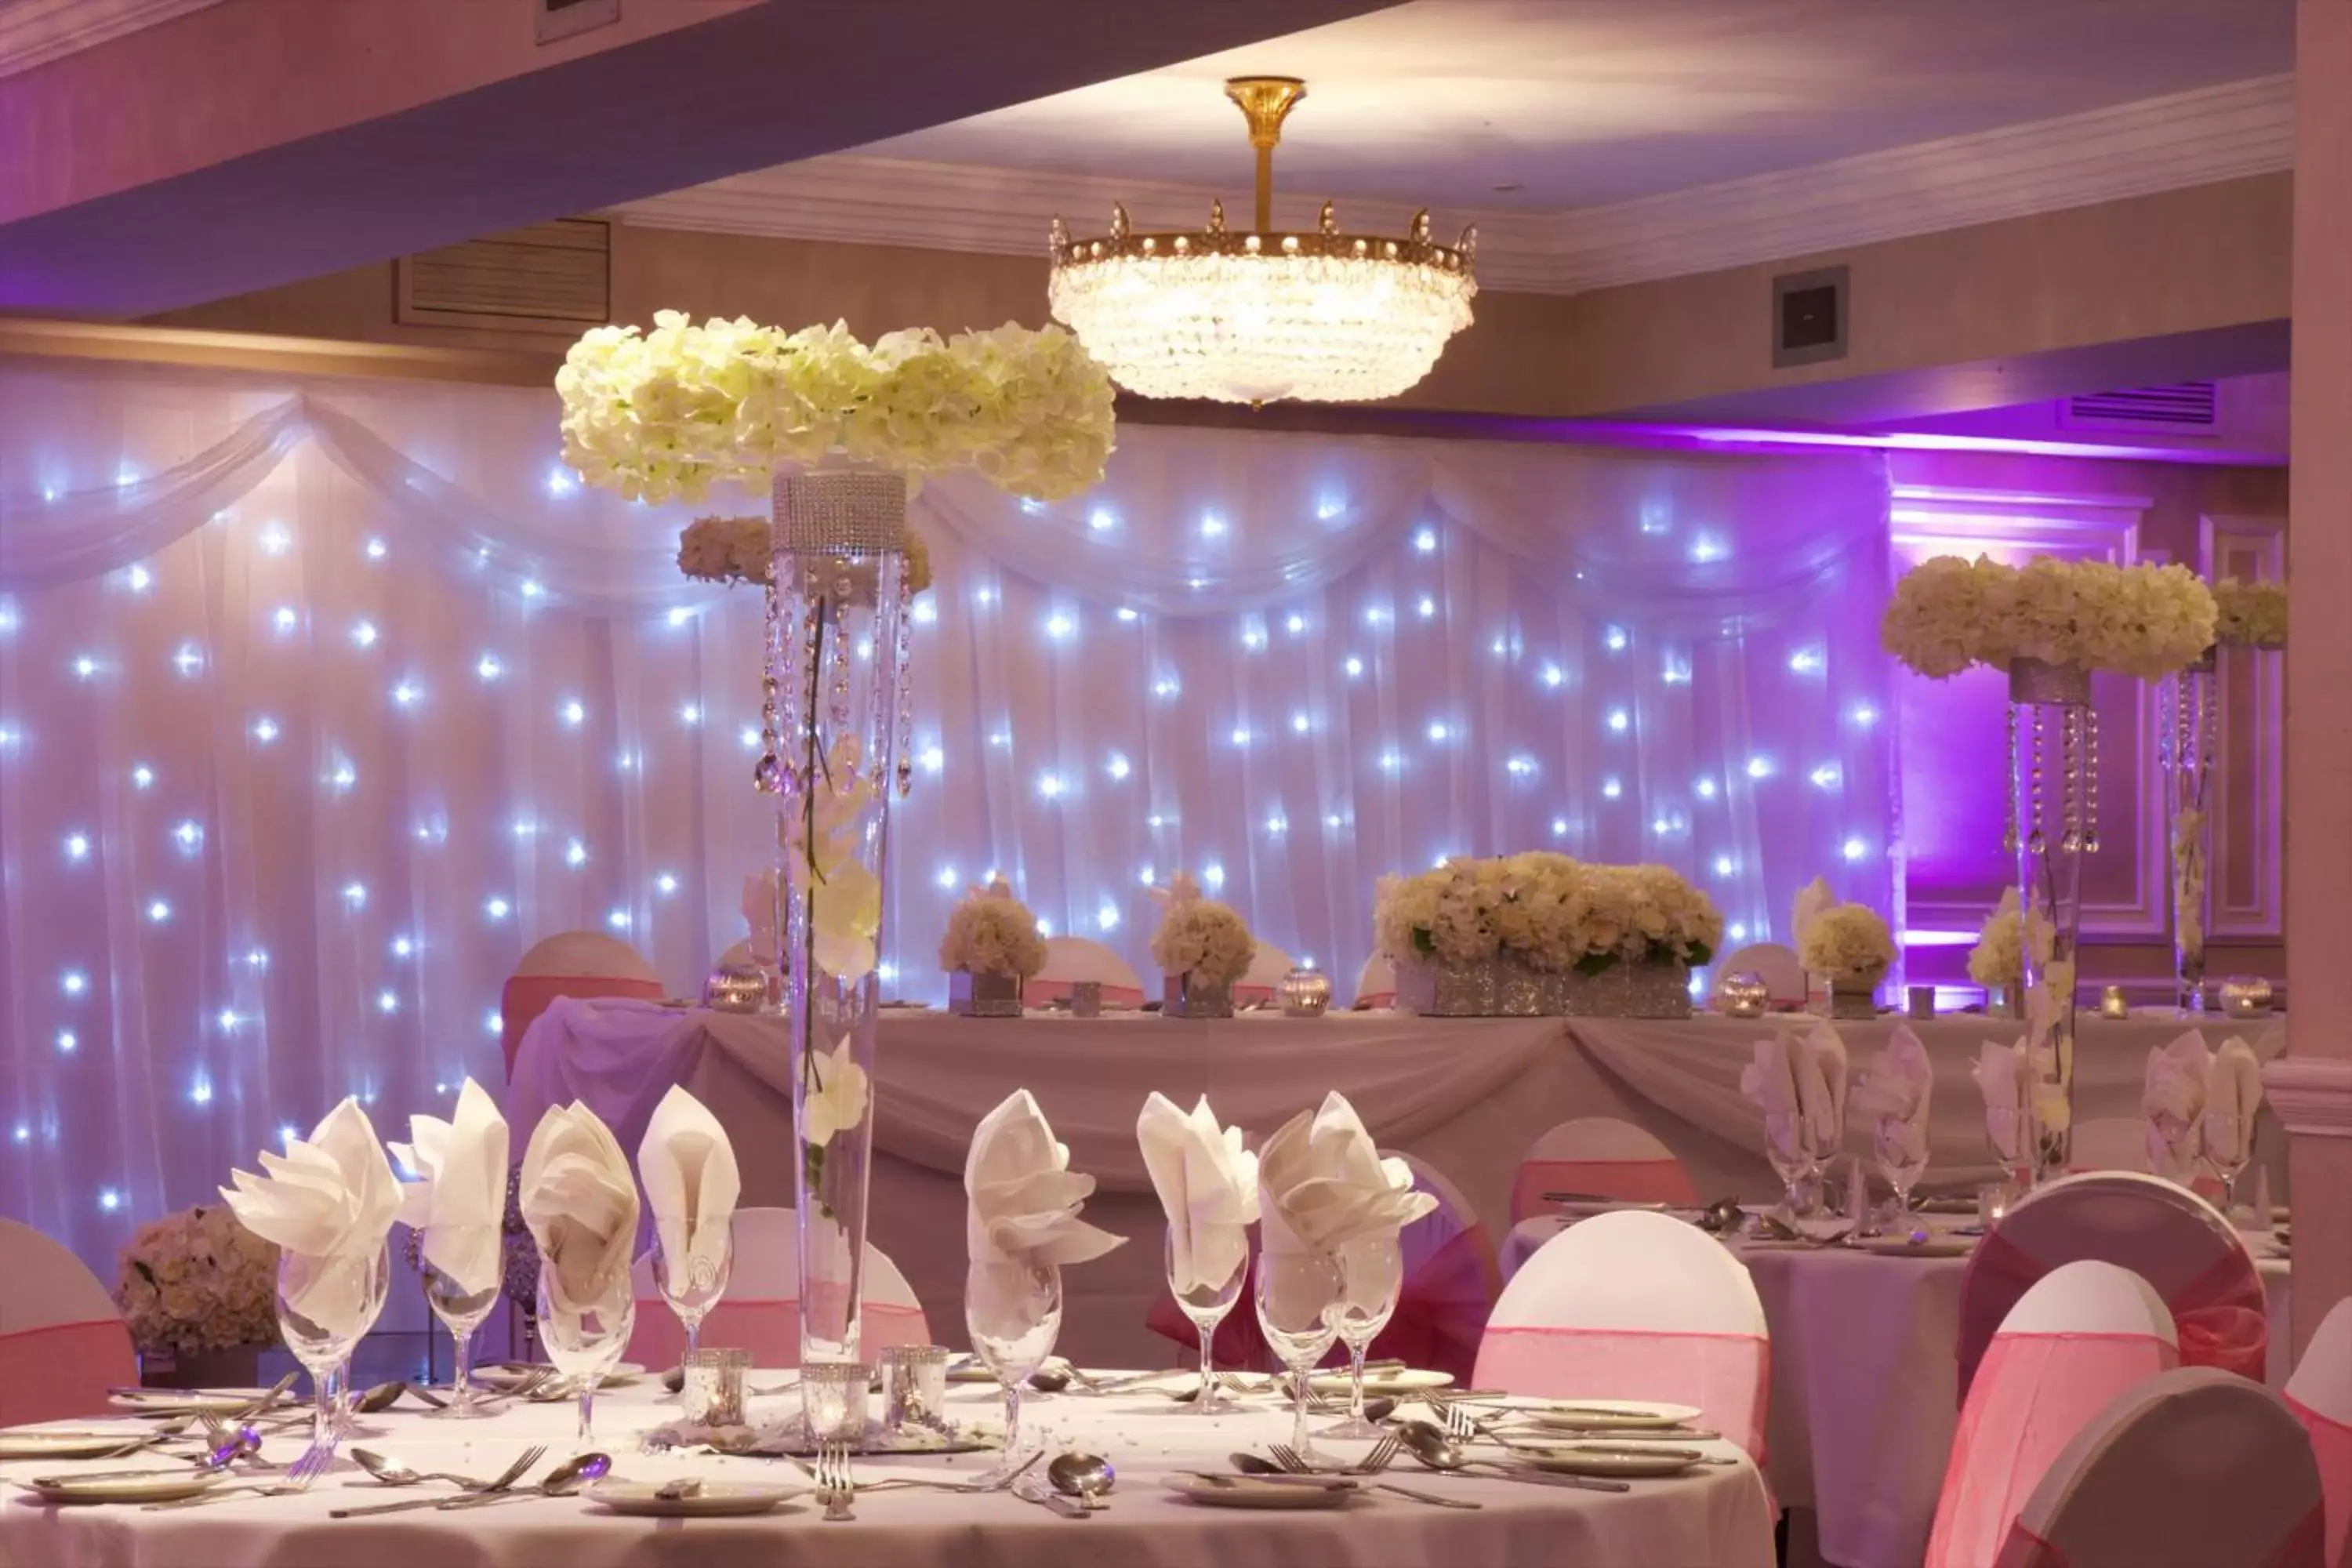 Banquet/Function facilities, Banquet Facilities in London Chigwell Prince Regent Hotel, BW Signature Collection